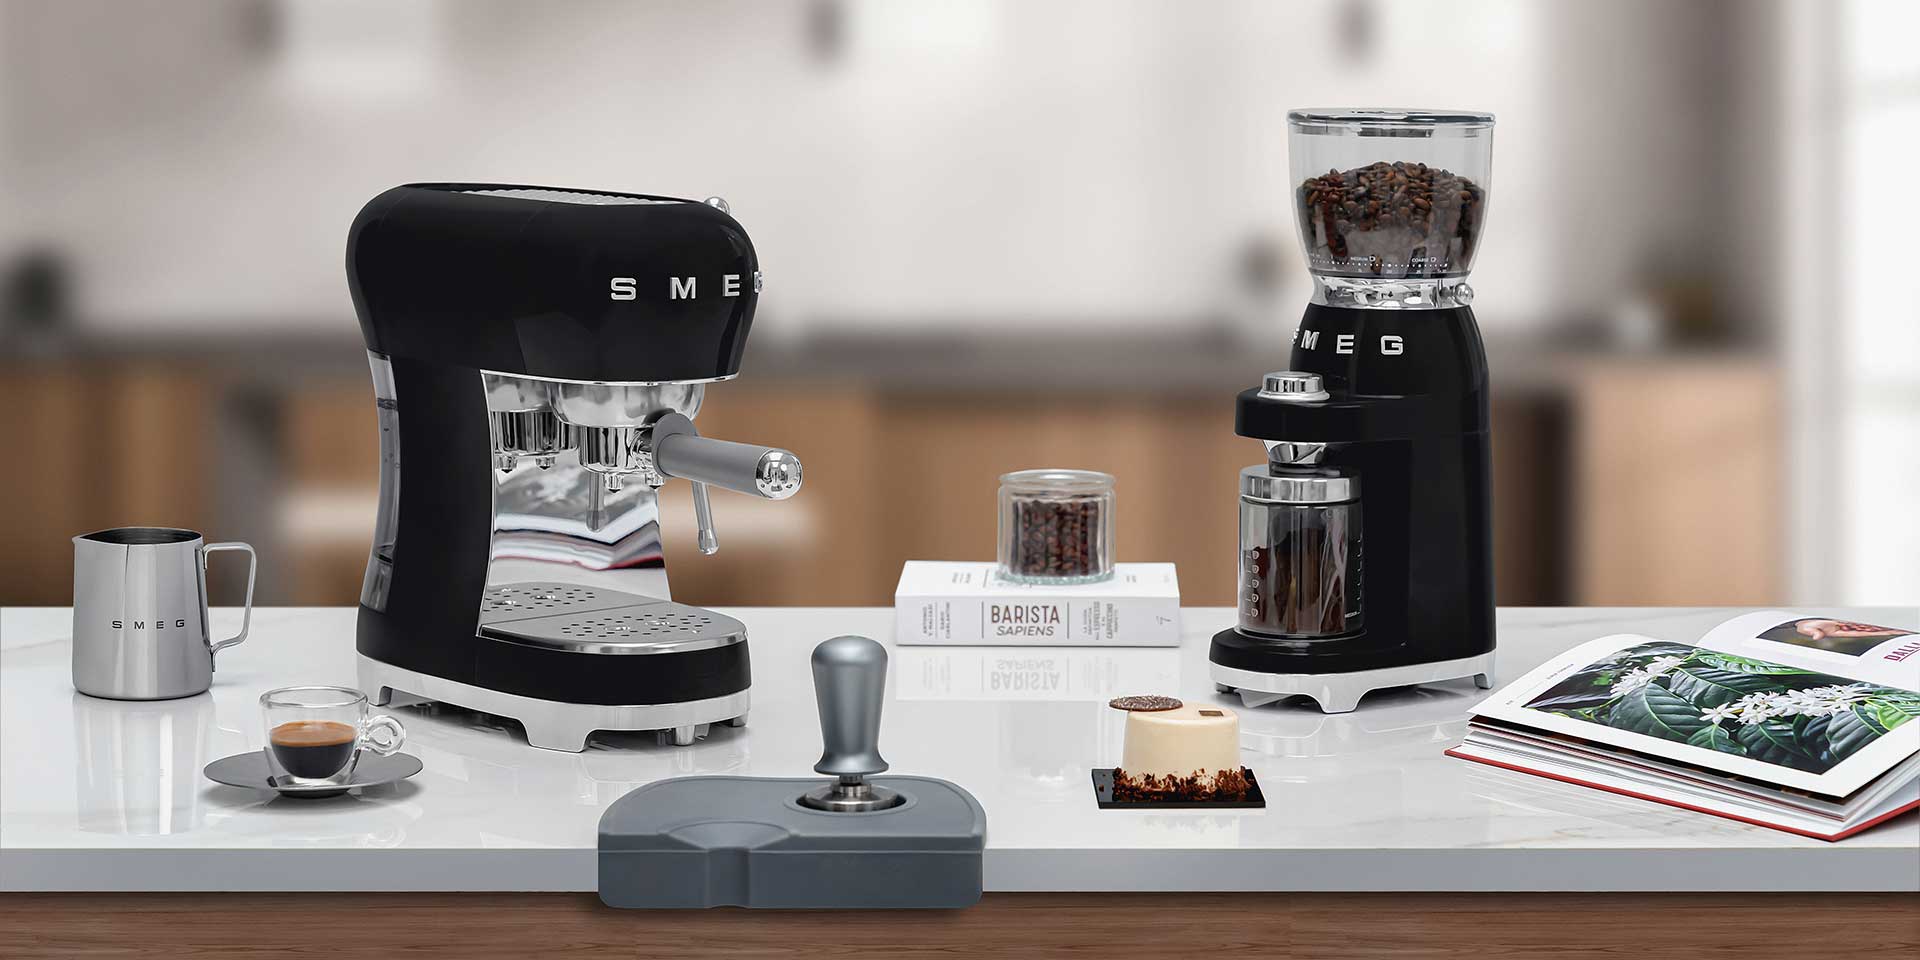 Channel your inner Barista